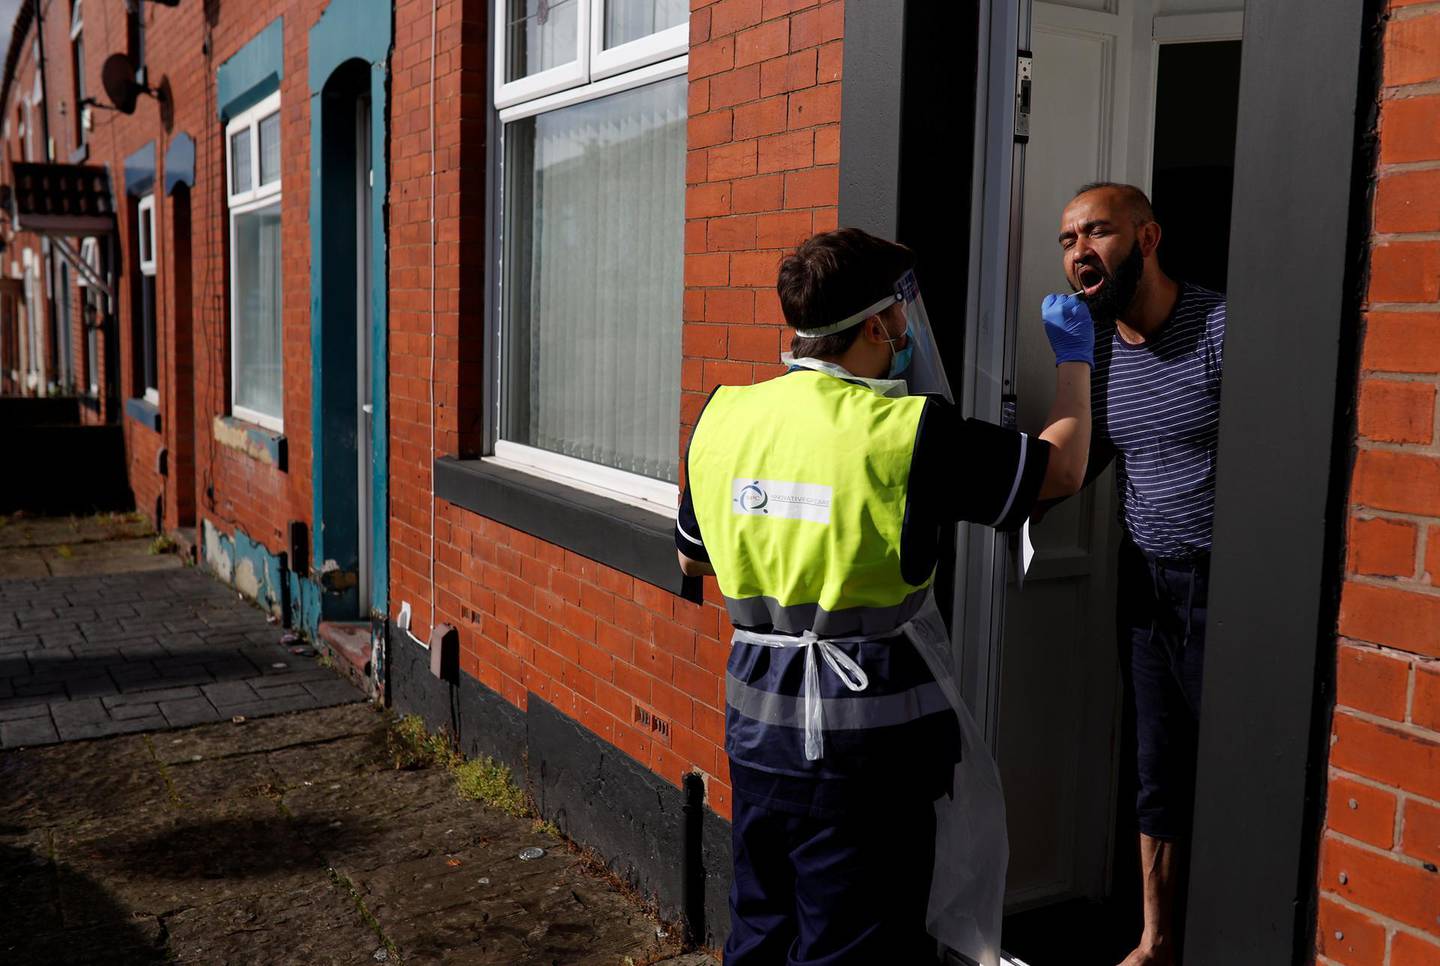 A member of the community swabbing team carries out a doorstep COVID-19 test following the outbreak of the coronavirus disease (COVID-19) in Chadderton, Britain, October 1, 2020. Picture taken October 1, 2020.   To match Special Report HEALTH-CORONAVIRUS/BRITAIN-NEWWAVE  REUTERS/Phil Noble